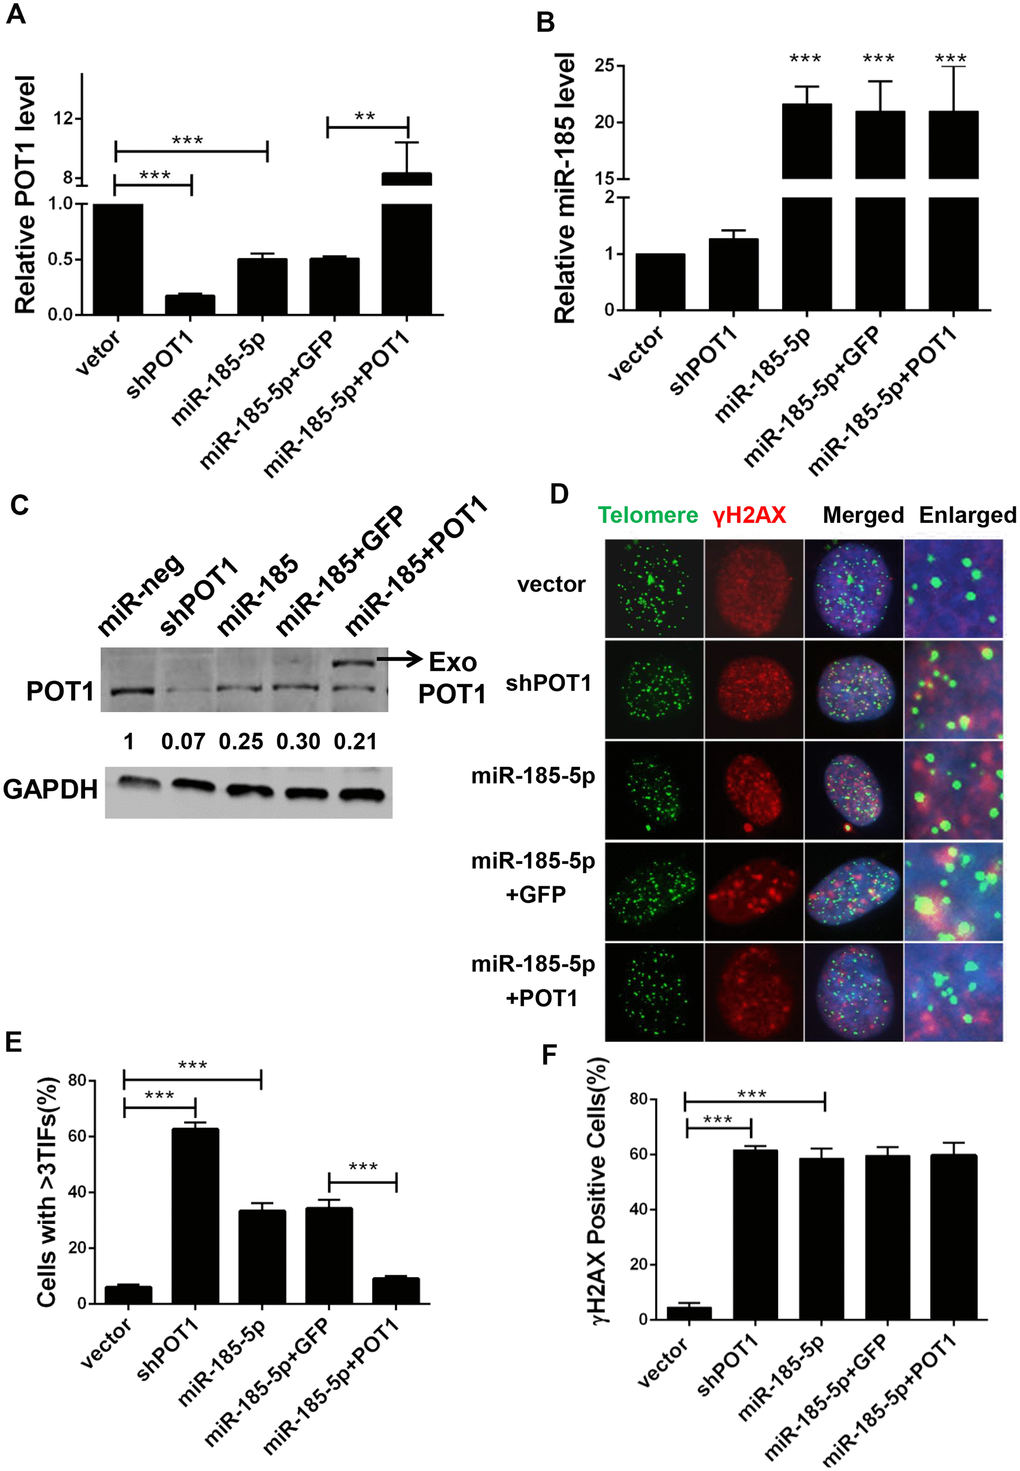 MiR-185 induces DNA damage foci at dysfunctional telomeres by decreasing POT1 protein level in cancer cells. (A) POT1 mRNA levels in POT1 knockdown, miR-185 overexpressing and POT1 rescue HTC75 cells. (B) miR-185 levels in POT1 knockdown, miR-185 overexpression and POT1 rescuing HTC75 cells. (C) POT1 protein level in POT1 knocking-down, miR-185 overexpression and POT1 rescue HTC75 cells. The arrowhead indicates exogenously overexpressed POT1. GAPDH was blotted as a loading control. (D) Immunofluorescence and fluorescence in situ hybridization (IF-FISH) were performed in POT1 knockdown, miR-185 overexpression and POT1 rescue HTC75 cells with the indicated γ-H2AX antibody and the TTAGGG telomere probe. Nuclei were stained with Hoechst 33342. (E) Quantification of percentage of cells in (D) with more than 3 TIFs. Error bars indicate standard deviations (n=3). P values were determined by Student’s t-test. ***PF) Quantification of the percentage of cells with signal indicating total DNA damage (γ-H2AX positive cells) in (D).